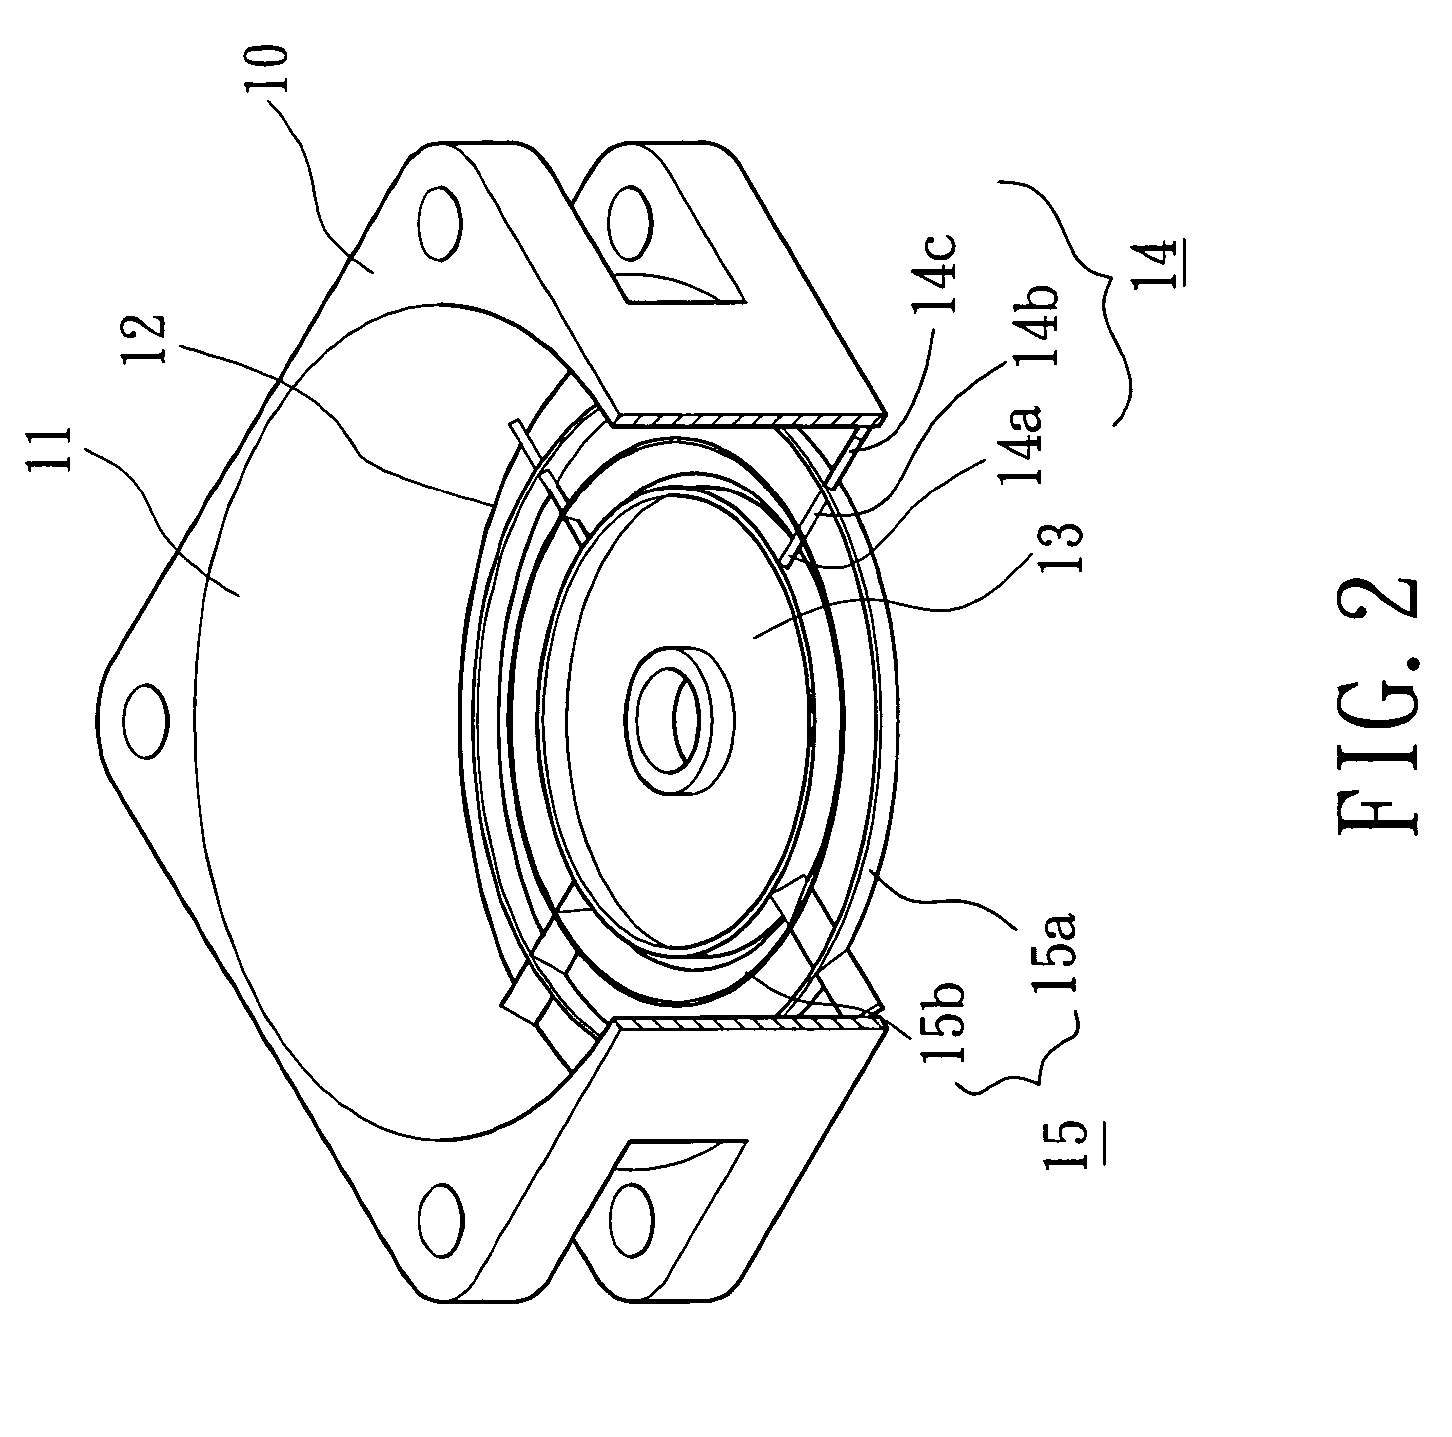 Airflow guiding structure varying in inclinations of air-guiding rings for a heat-dissipating fan